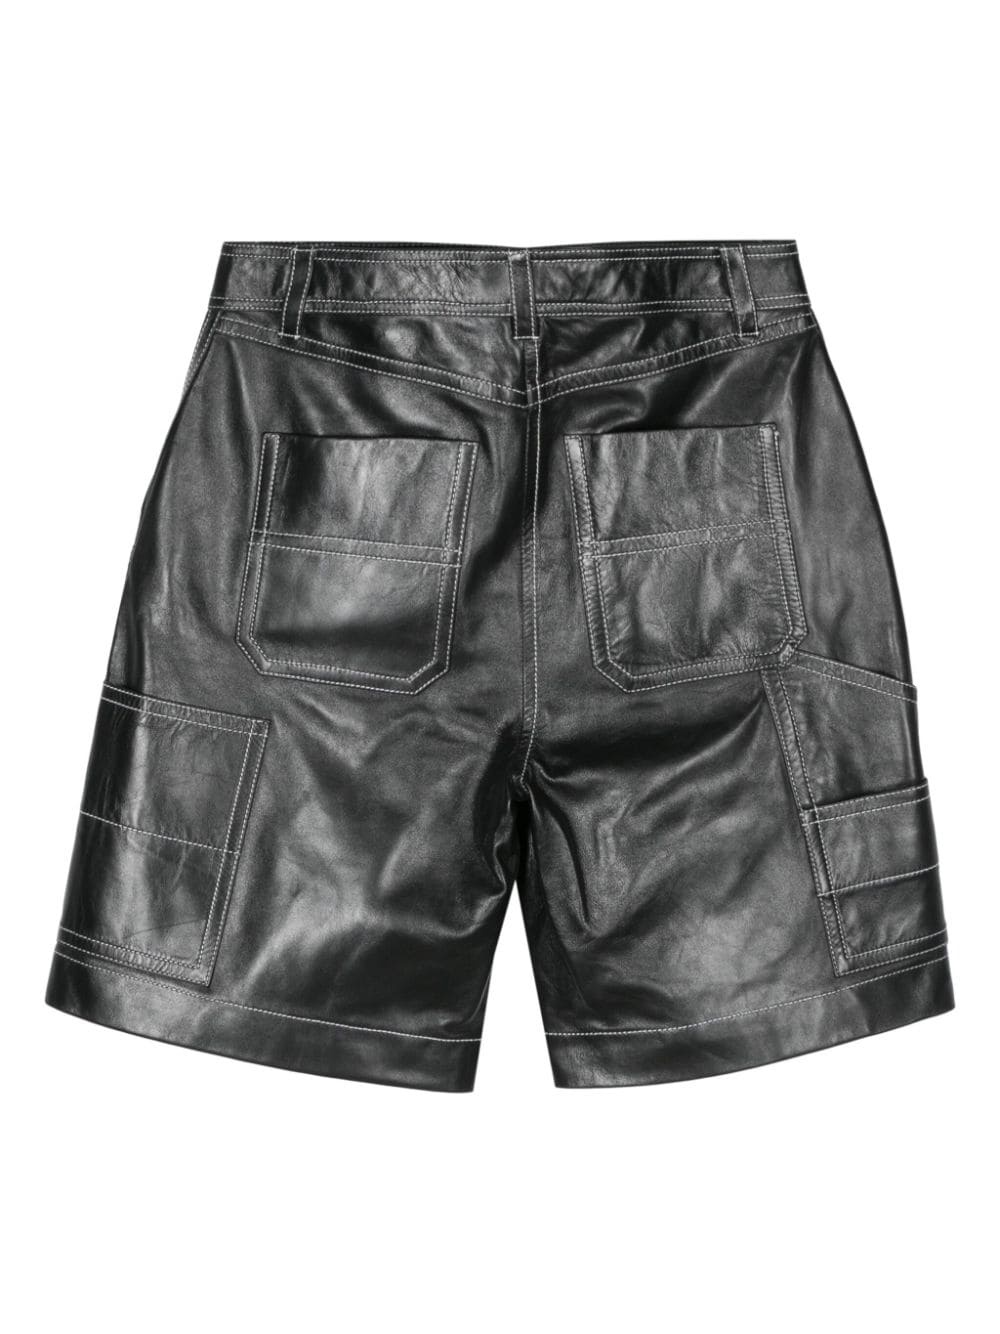 Rue leather shorts - 2